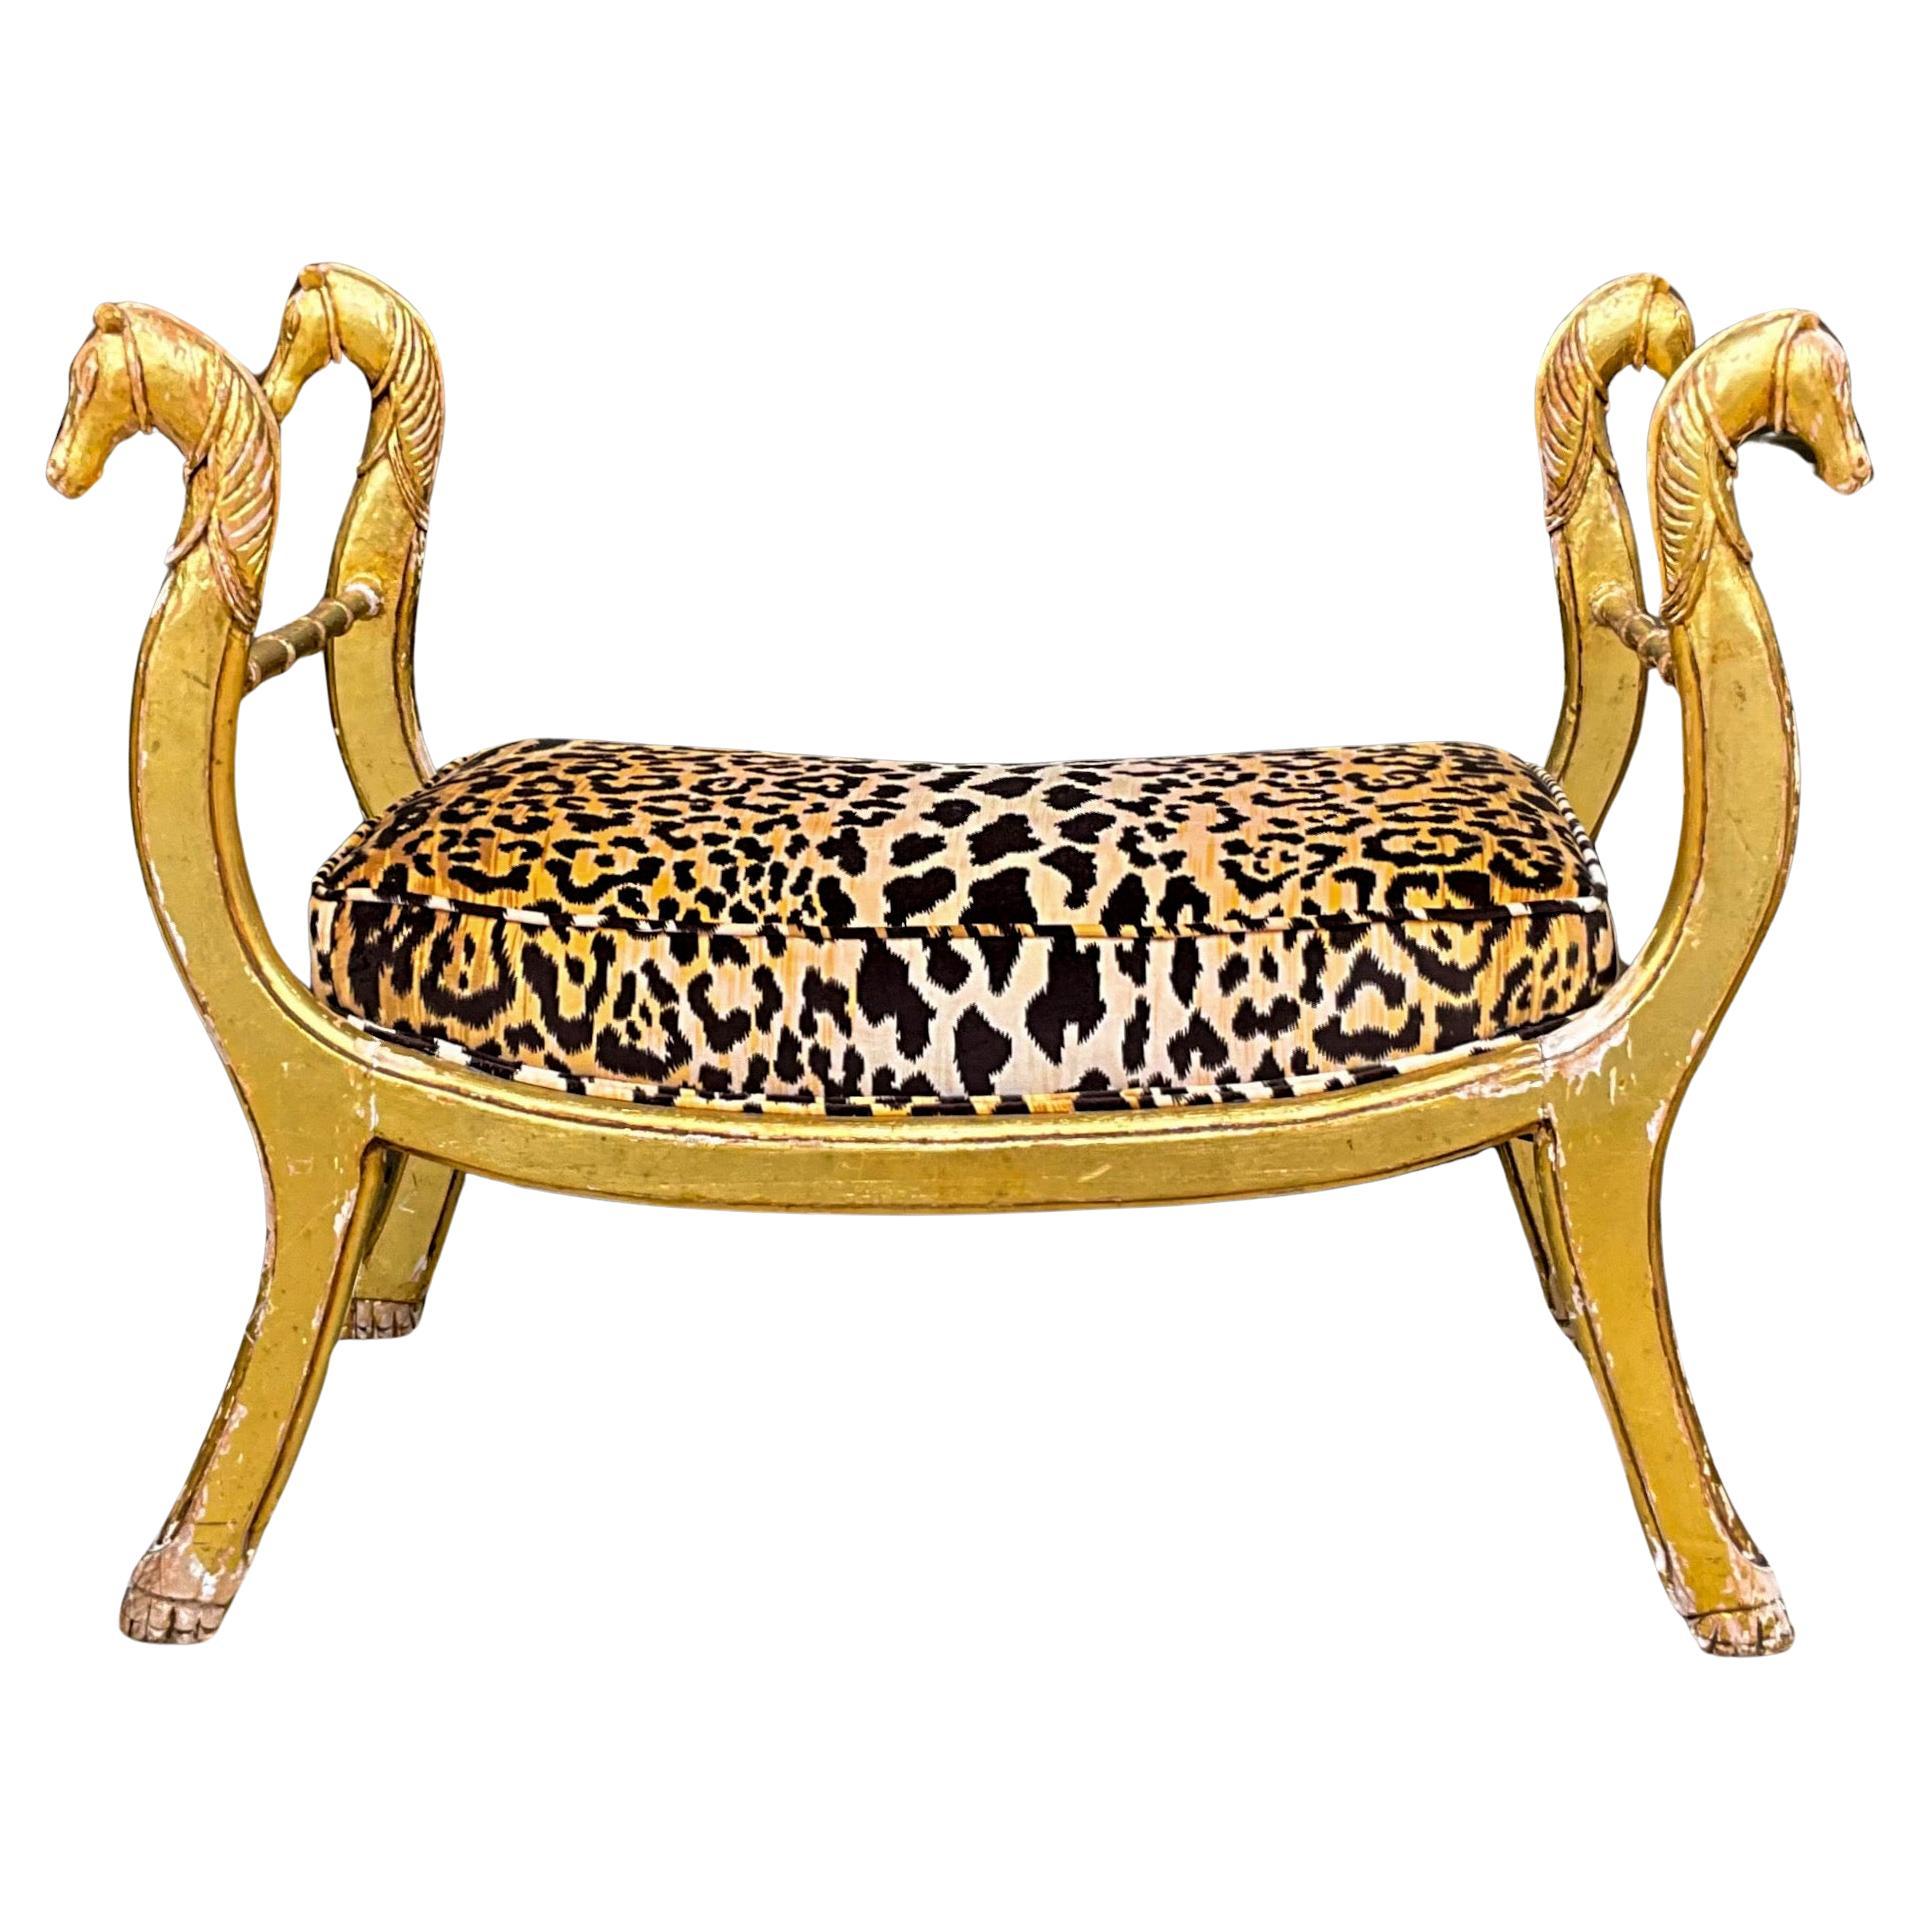 19th-C. Neo-Classical Maison Jansen Style Giltwood Bench In Leopard Velvet  For Sale